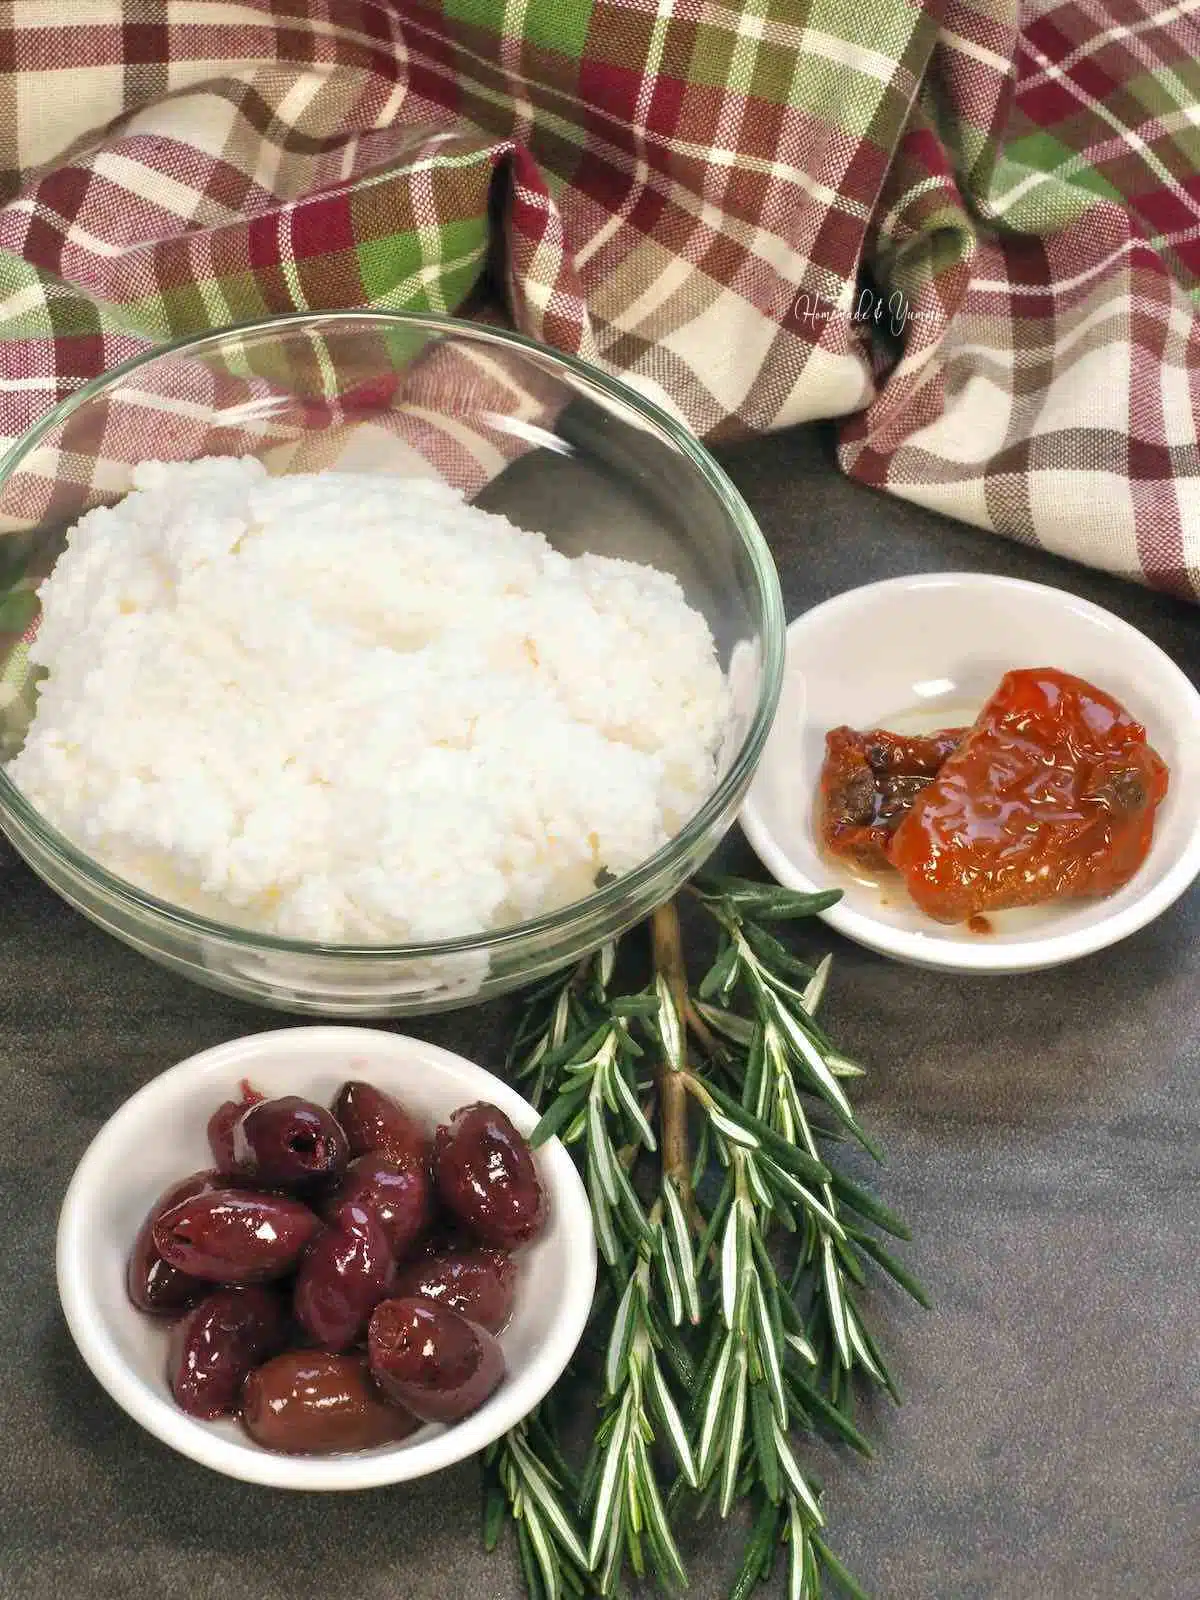 Ingredients for making a dip with ricotta cheese.